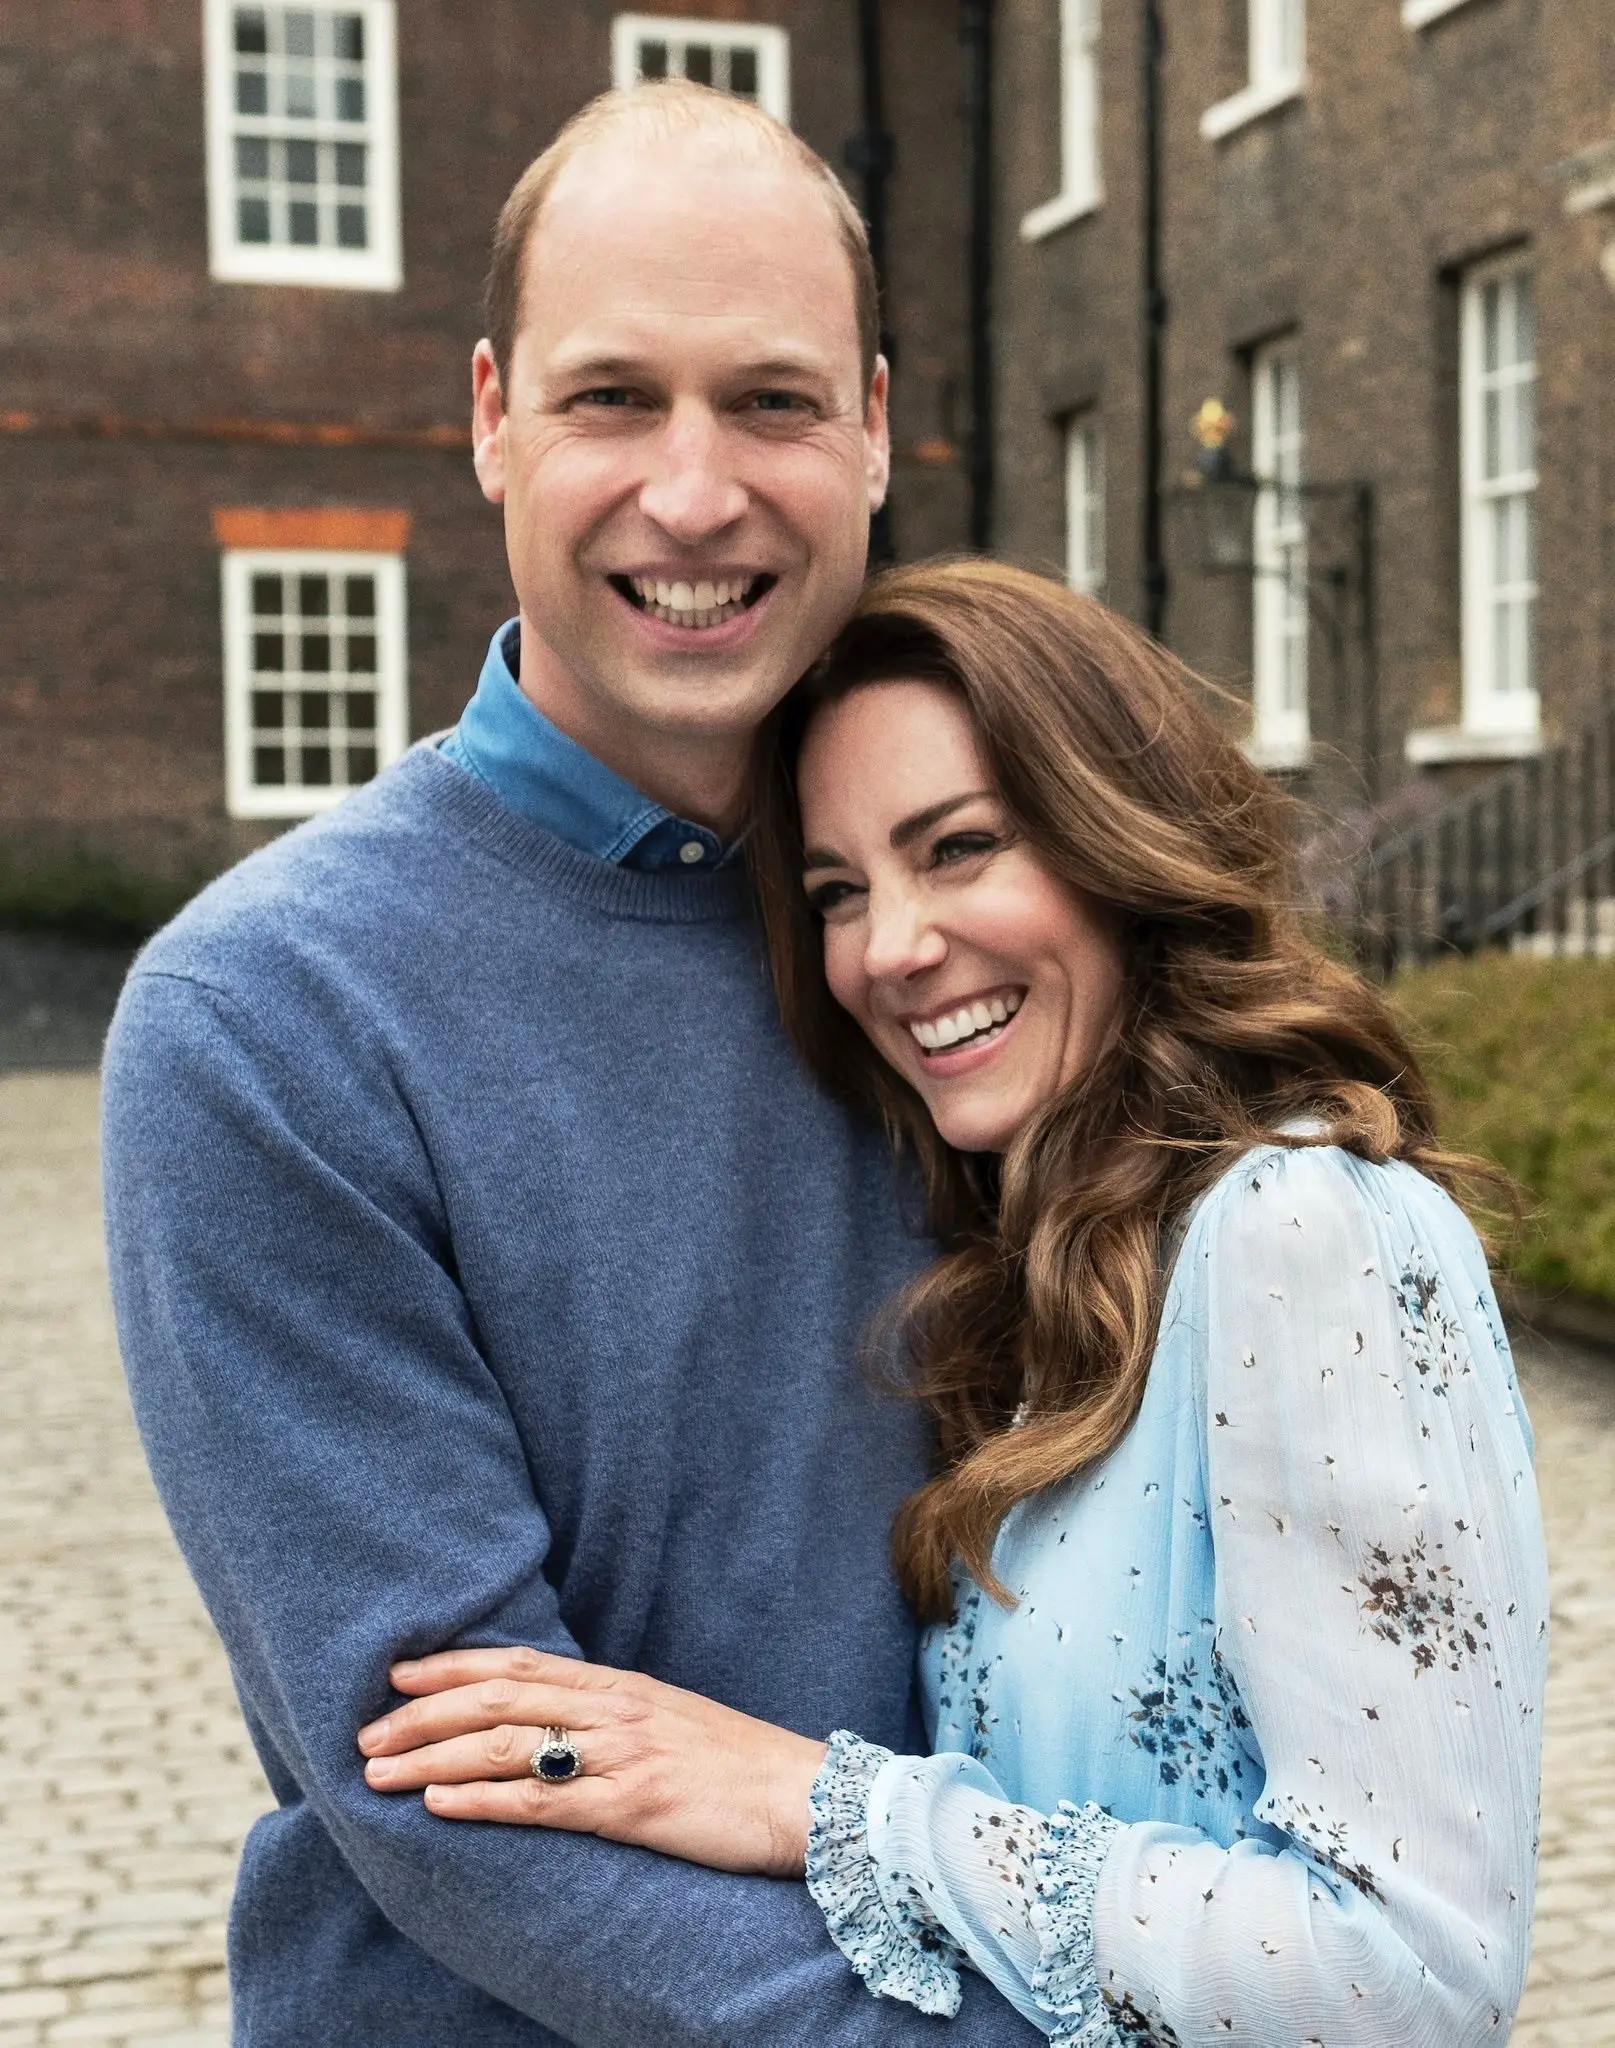 The Duke and Duchess of Cambridge recreated their engagement photoshoot moment for 10th wedding anniversary